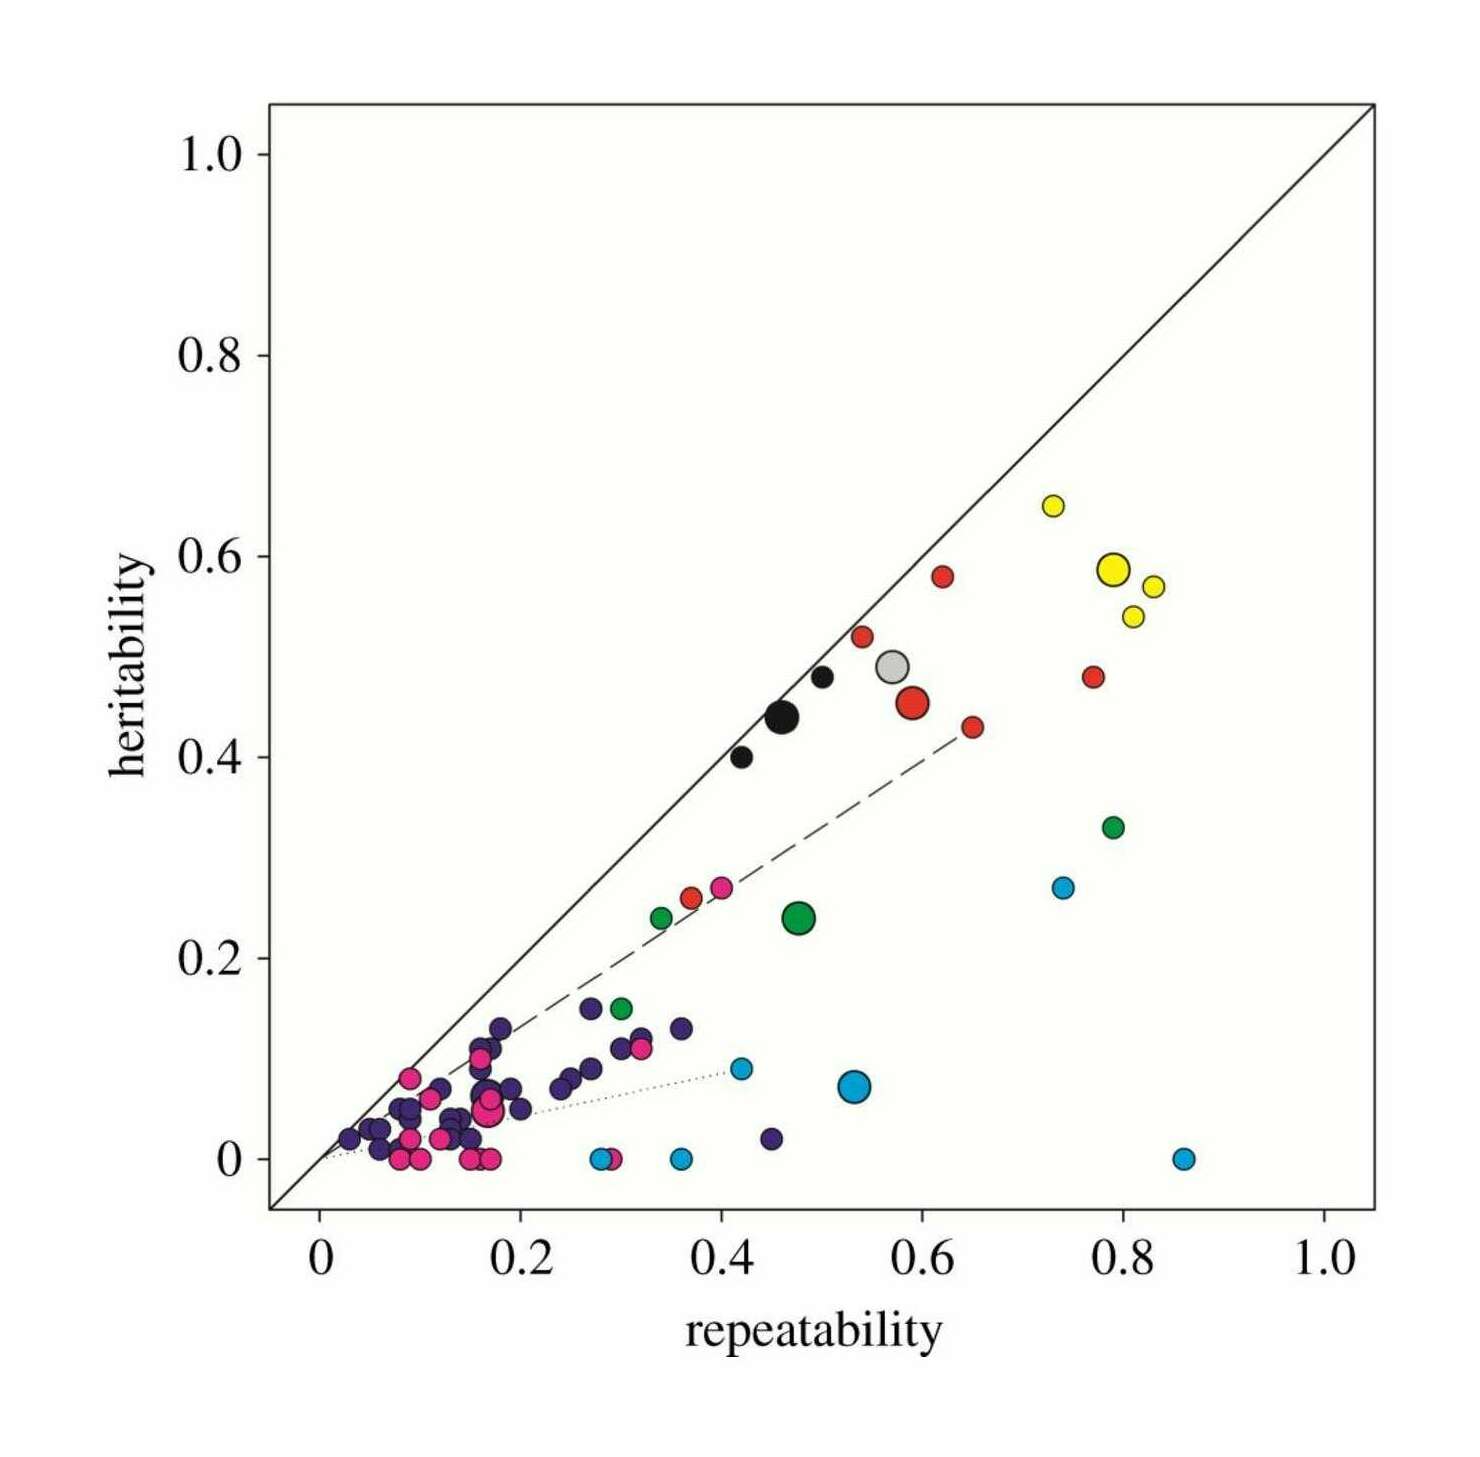 Figure 1: Heritability relative to repeatability. The solid line represents a 1:1 relationship between the heritability and repeatability. Large circles are study-level means for heritability and repeatability. Smaller circles are individual estimates from each study. Individual and mean estimates share the same colour by study. A point that falls directly on the solid line would represent one in which all personality (ie. repeatable) variation was attributable to additive genetic variation. The slope of the relationship between any particular point and the origin (0,0) estimates the proportion of personality variation for that behavioural measure attributable to additive genetic variation. For example, the dashed and dotted lines correspond, respectively, to behavioural responses where 66% and 21% of observed personality variation was attributable to additive genetic effects.